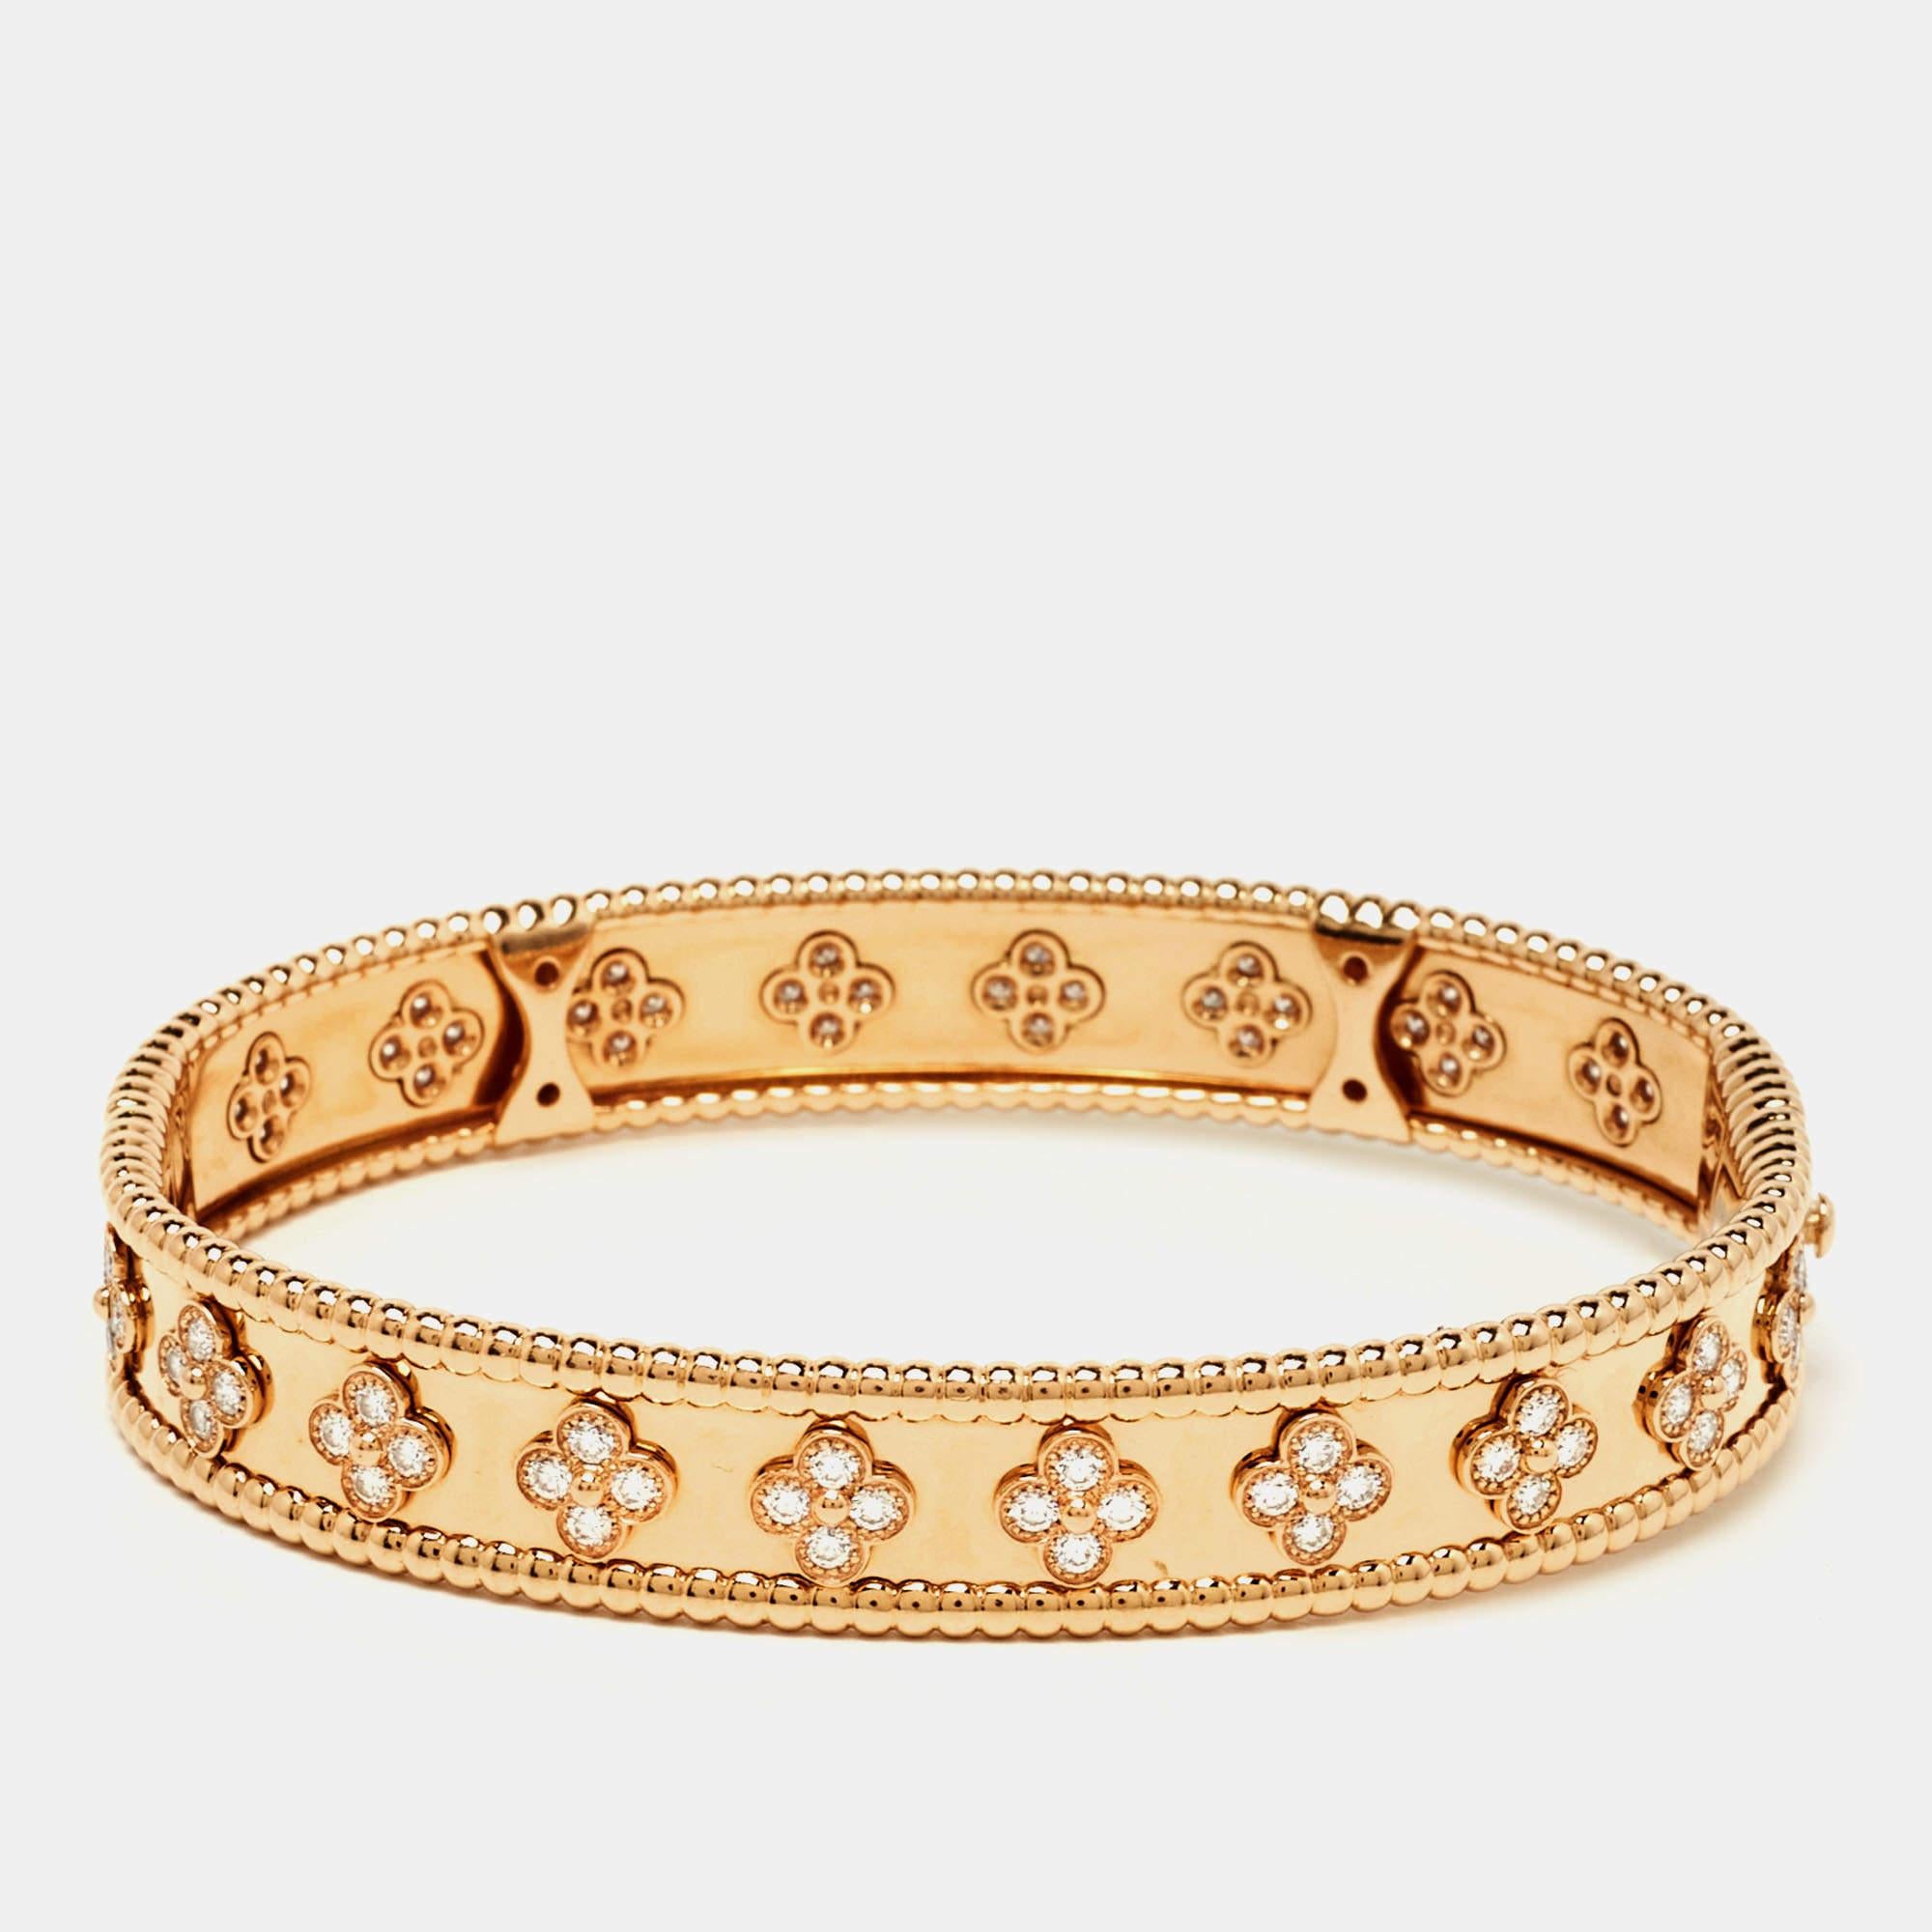 This Van Cleef & Arpels Perlée Sweet Clovers bracelet is a fine example of VC's prowess in jewelry making. It is sculpted using 18k rose gold and beautified with rows of signature Perlée beads and diamond-studded clover motifs. The jewel is a